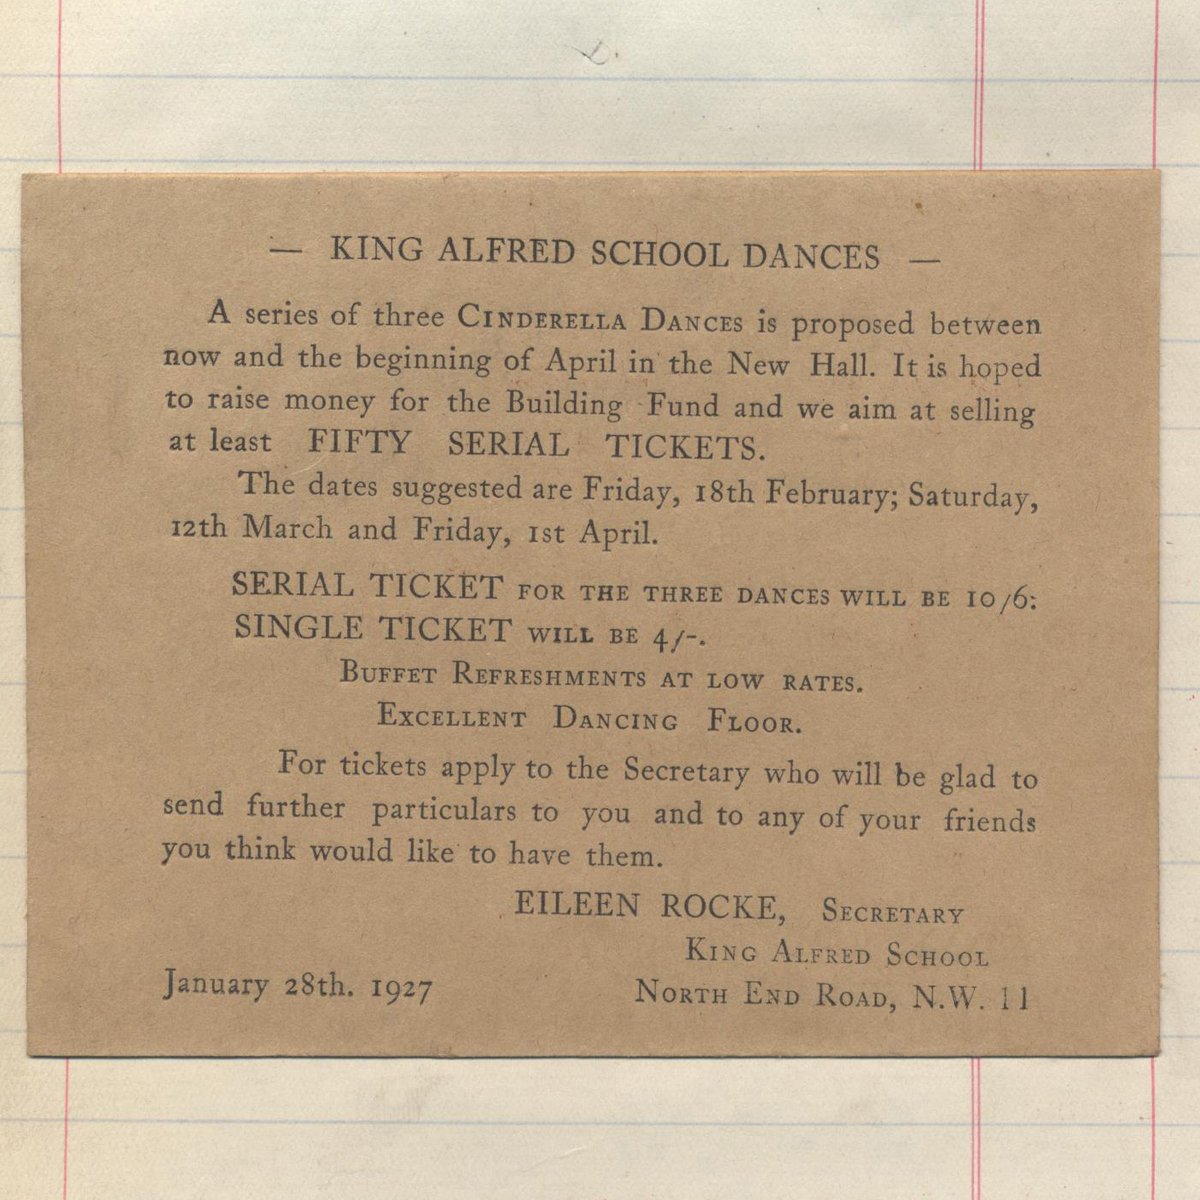 One of our most unique collections is a set of Print Records documenting everything KAS sent to the printers from 1926-67. These dance tickets from 1927 are wonderful examples of ephemera that give a glimpse of school social life.  #KAS125 #printinghistory #kingalfredschool